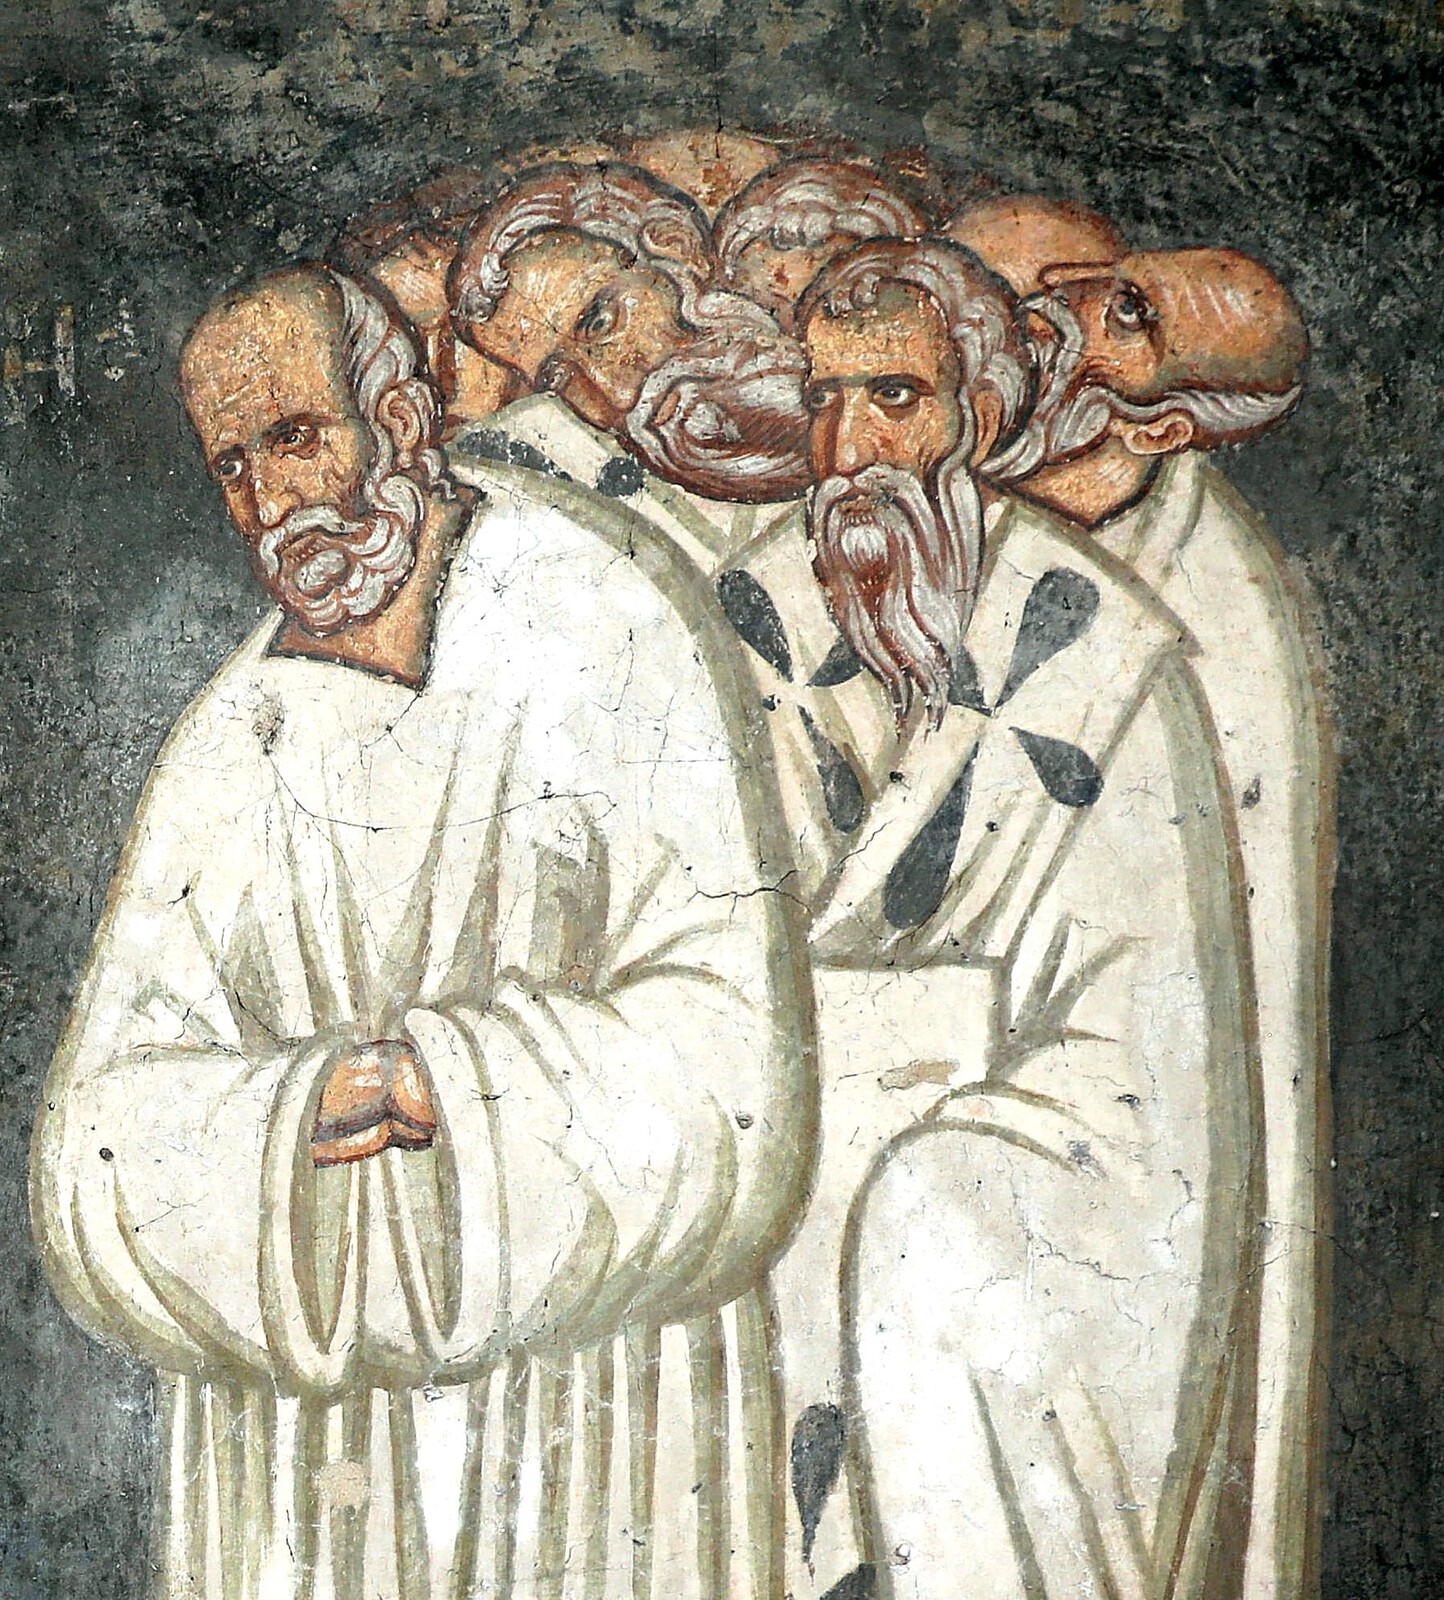 The Fifth Ecumenical council, detail